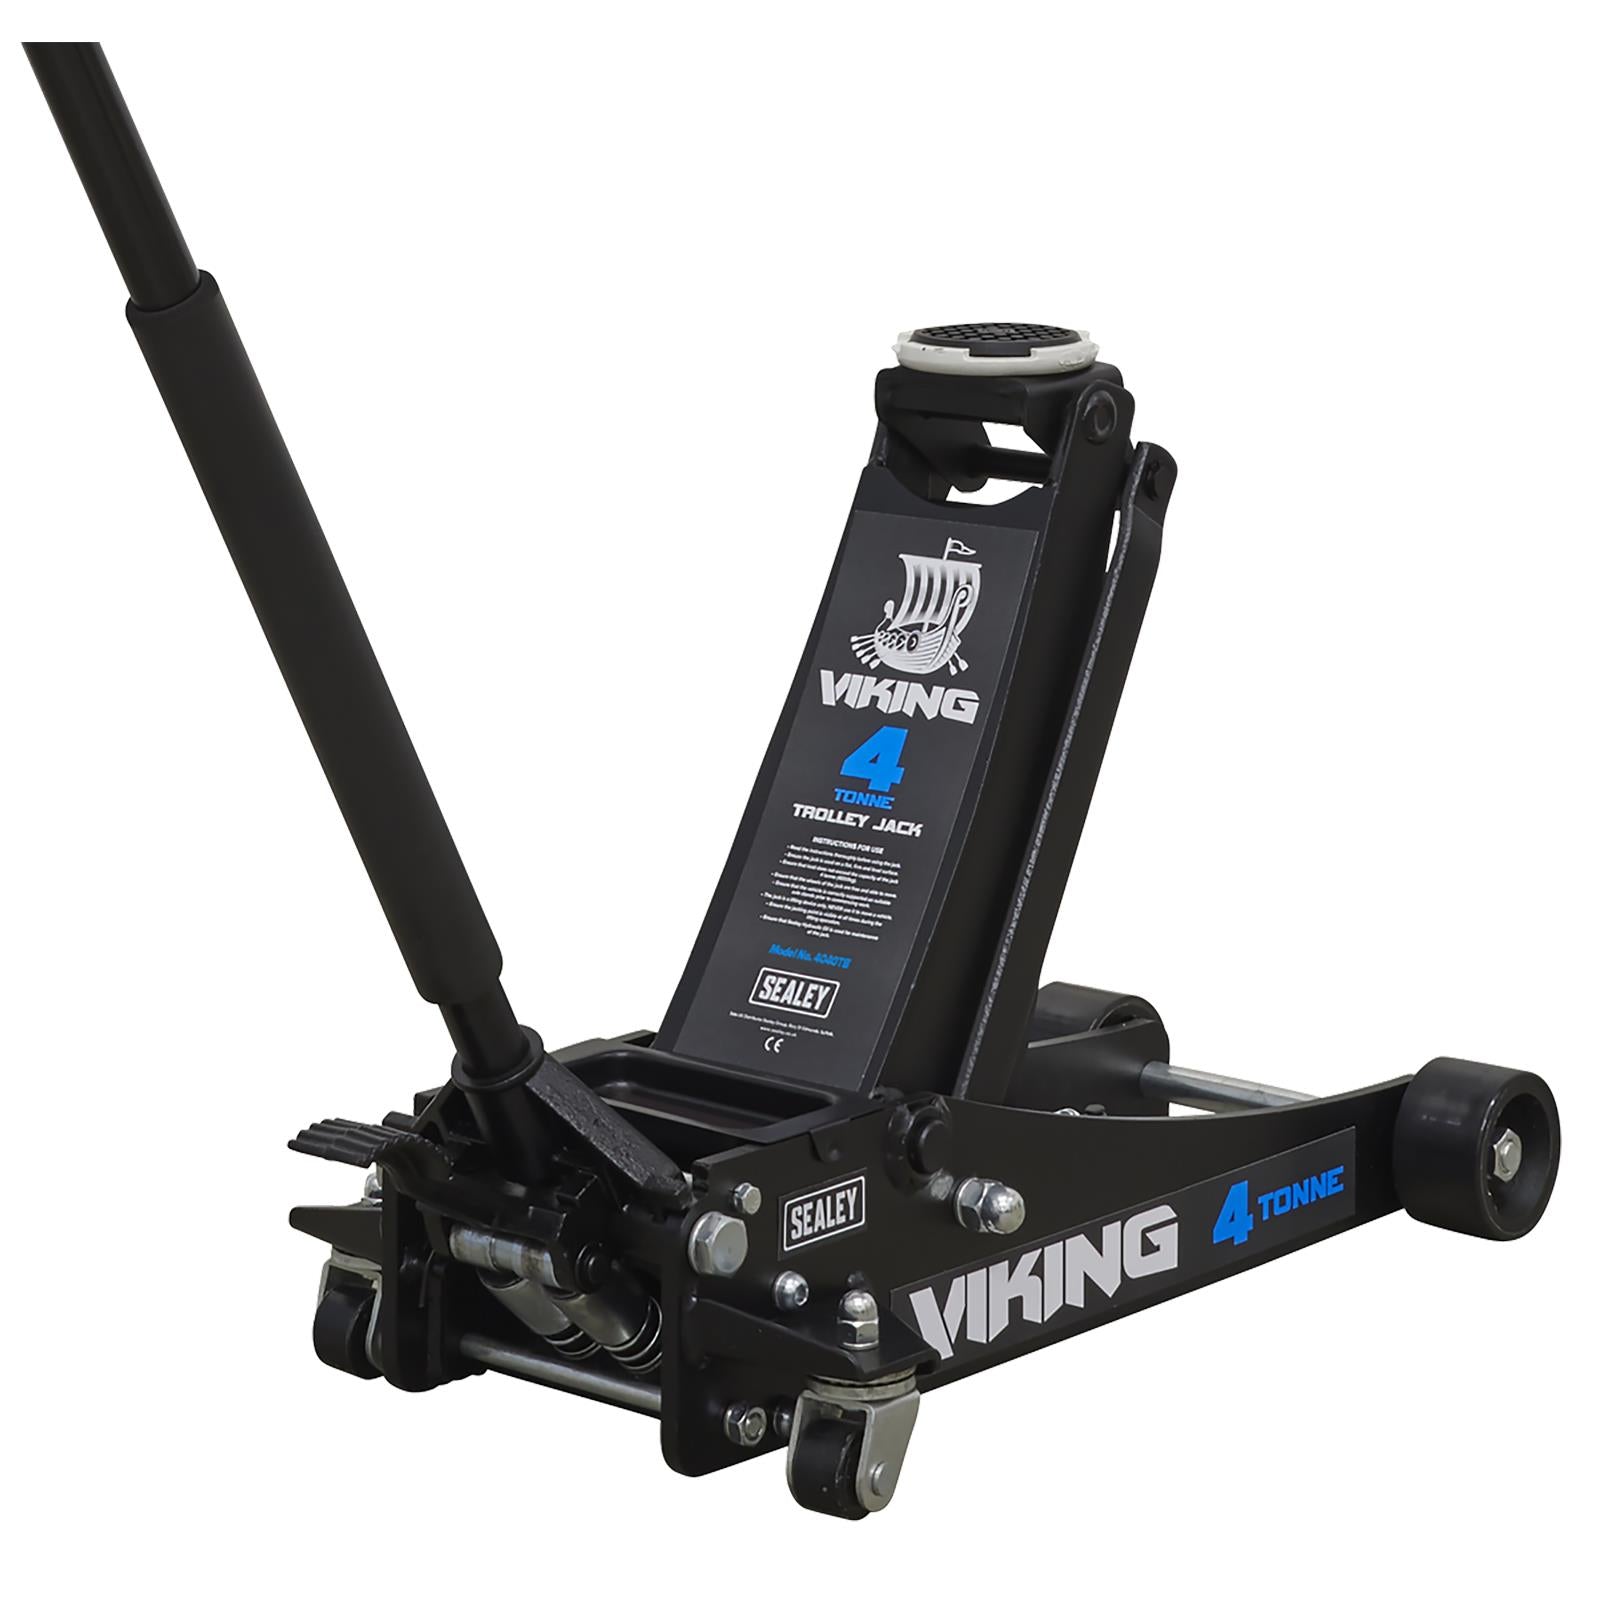 Sealey Viking 4 Tonne Tyre Bay Trolley Jack Low Entry with Rocket Lift